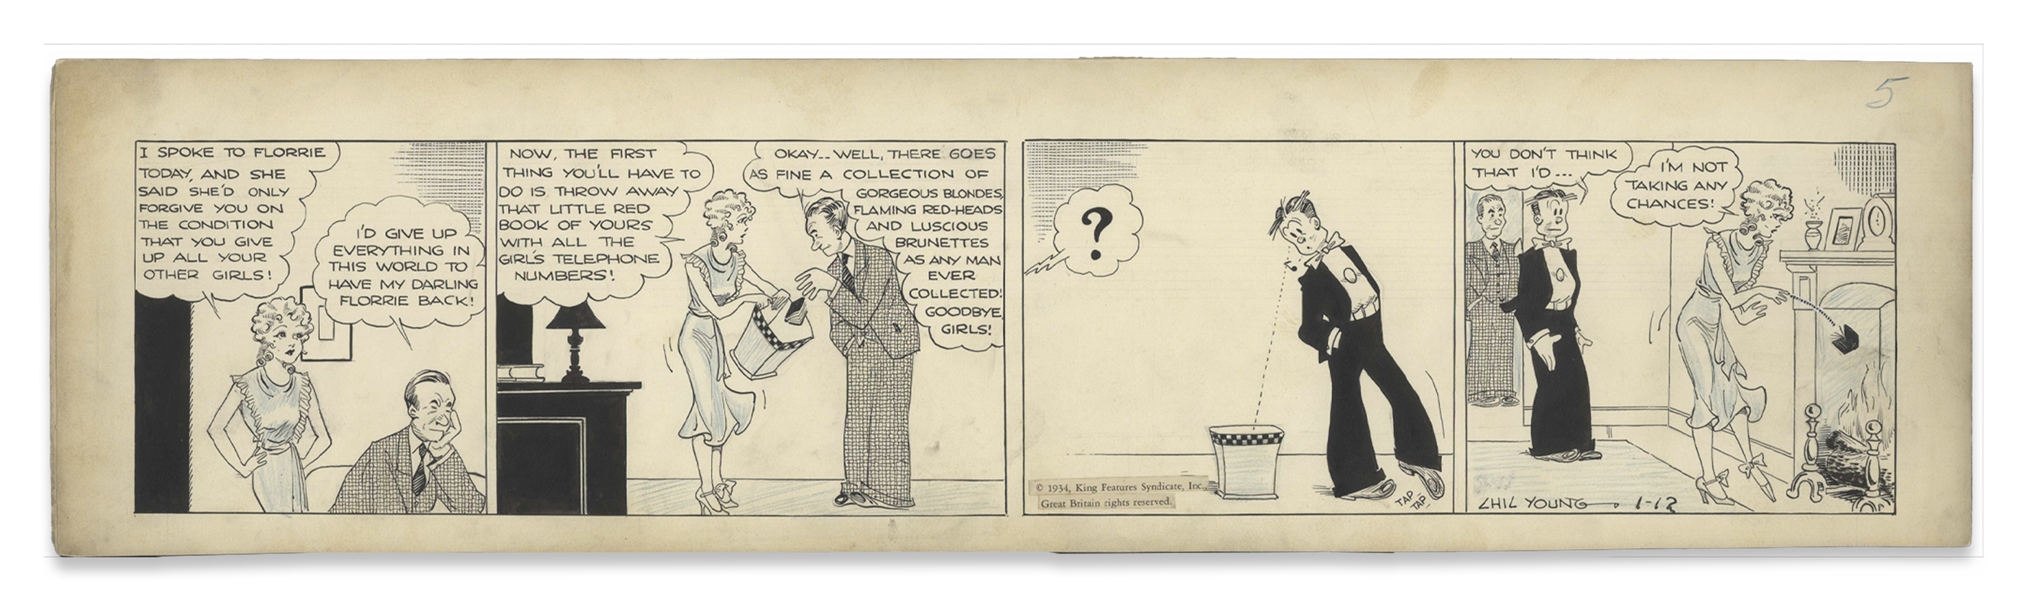 Chic Young Hand-Drawn ''Blondie'' Comic Strip From 1934 Titled ''The Moth and the Flames'' -- Blondie Doesn't Take Any Chances With a Little Black Book